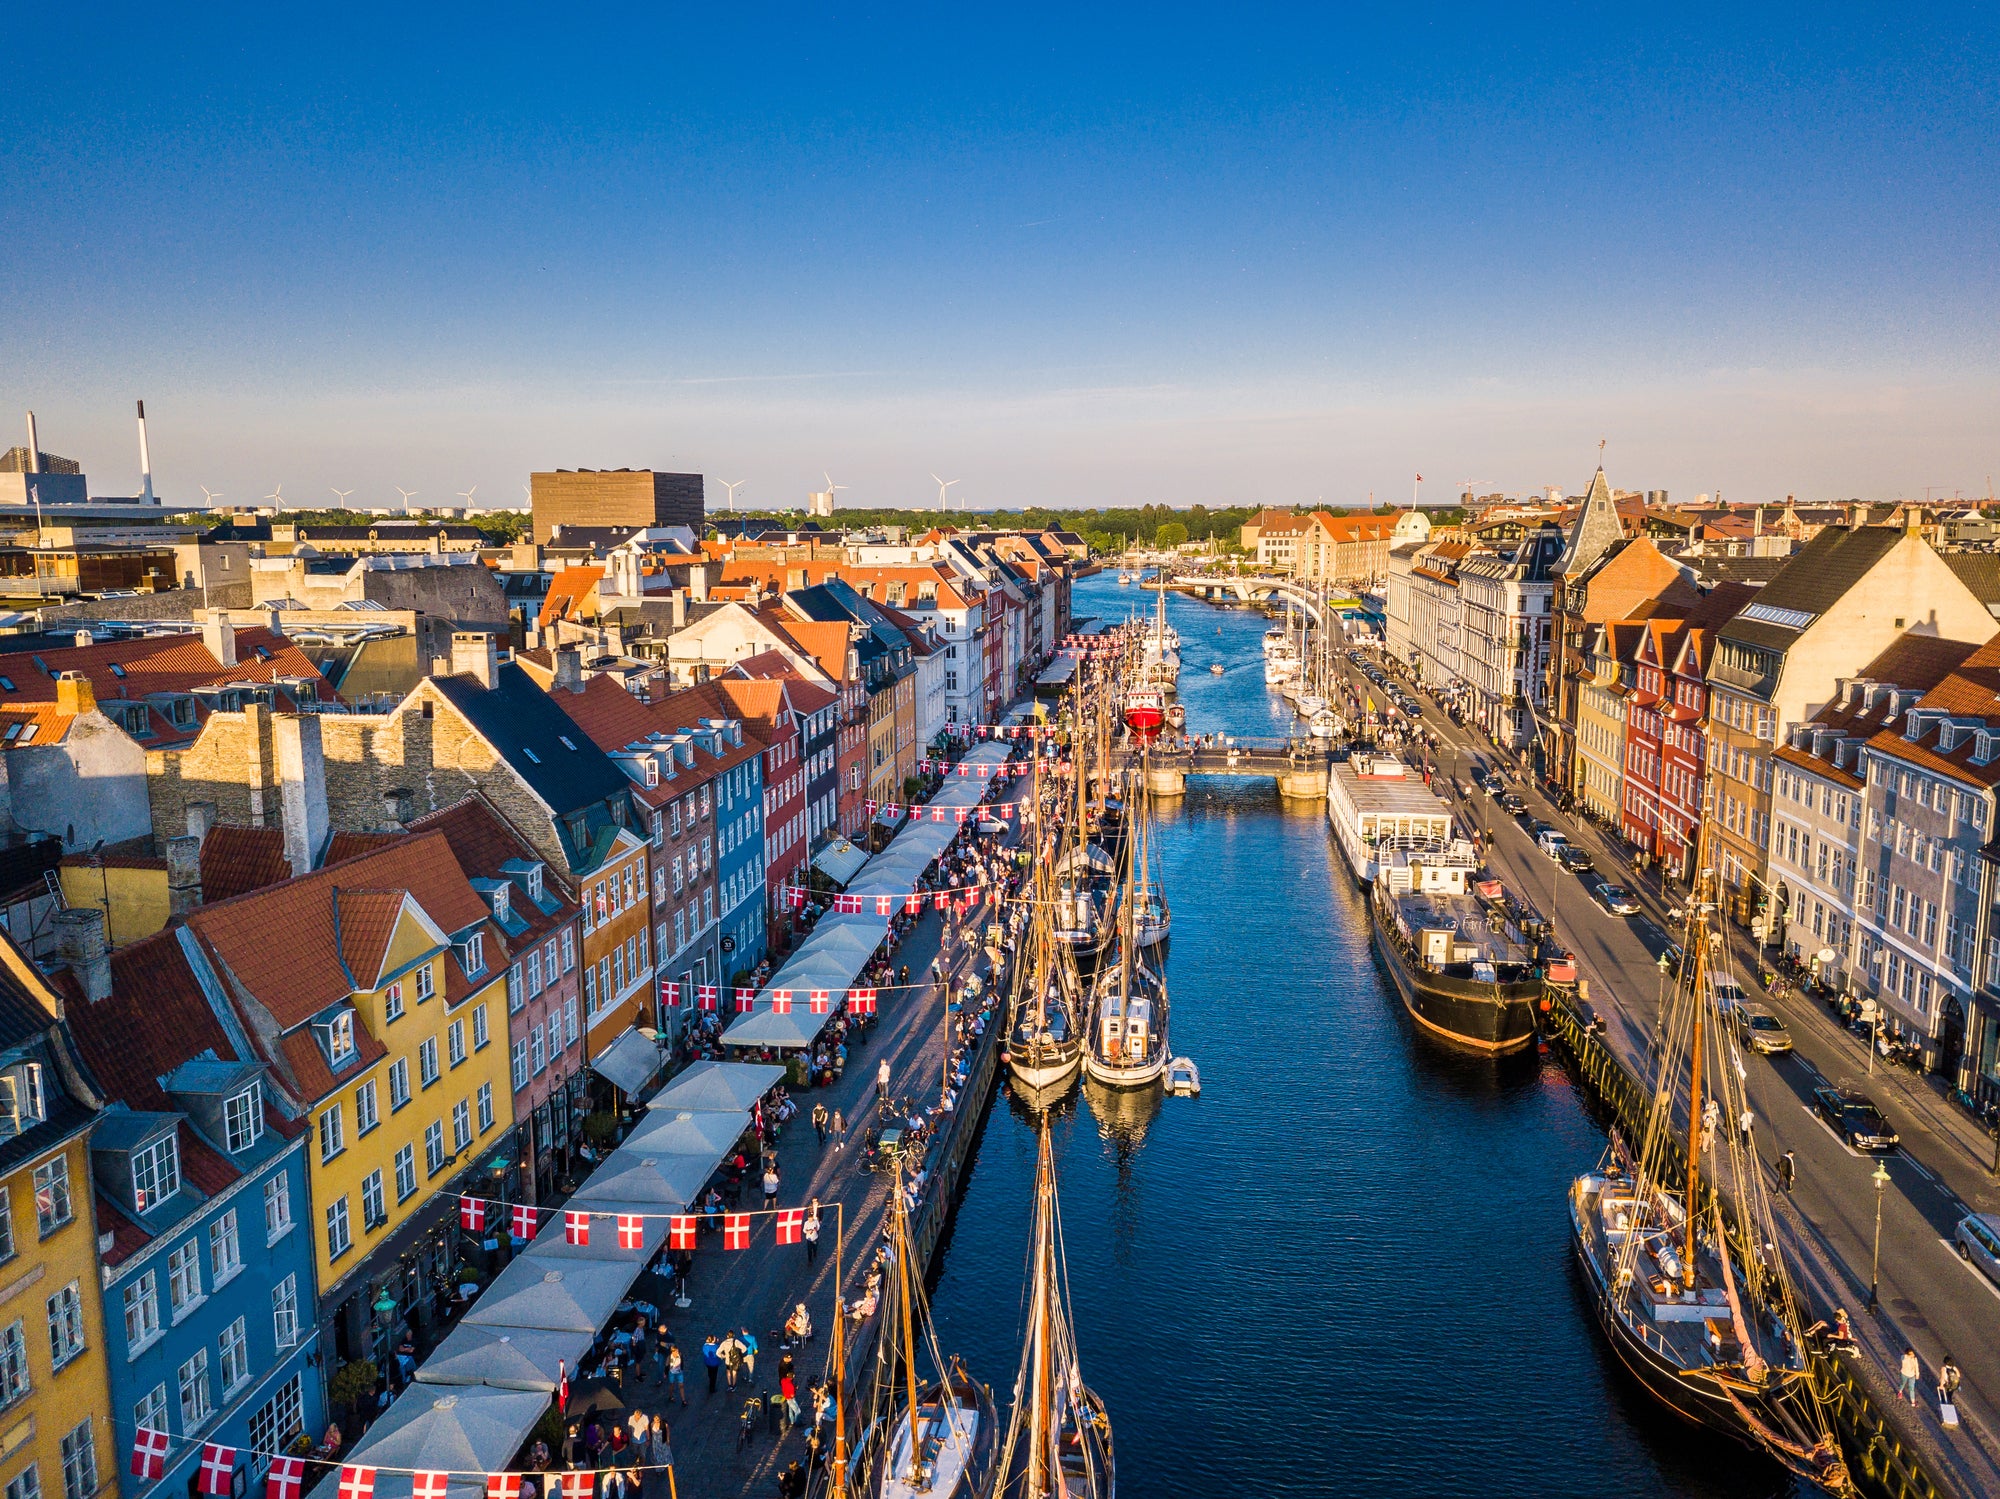 Copenhagen, the capital of Denmark, is regularly voted among the happiest cities in the world